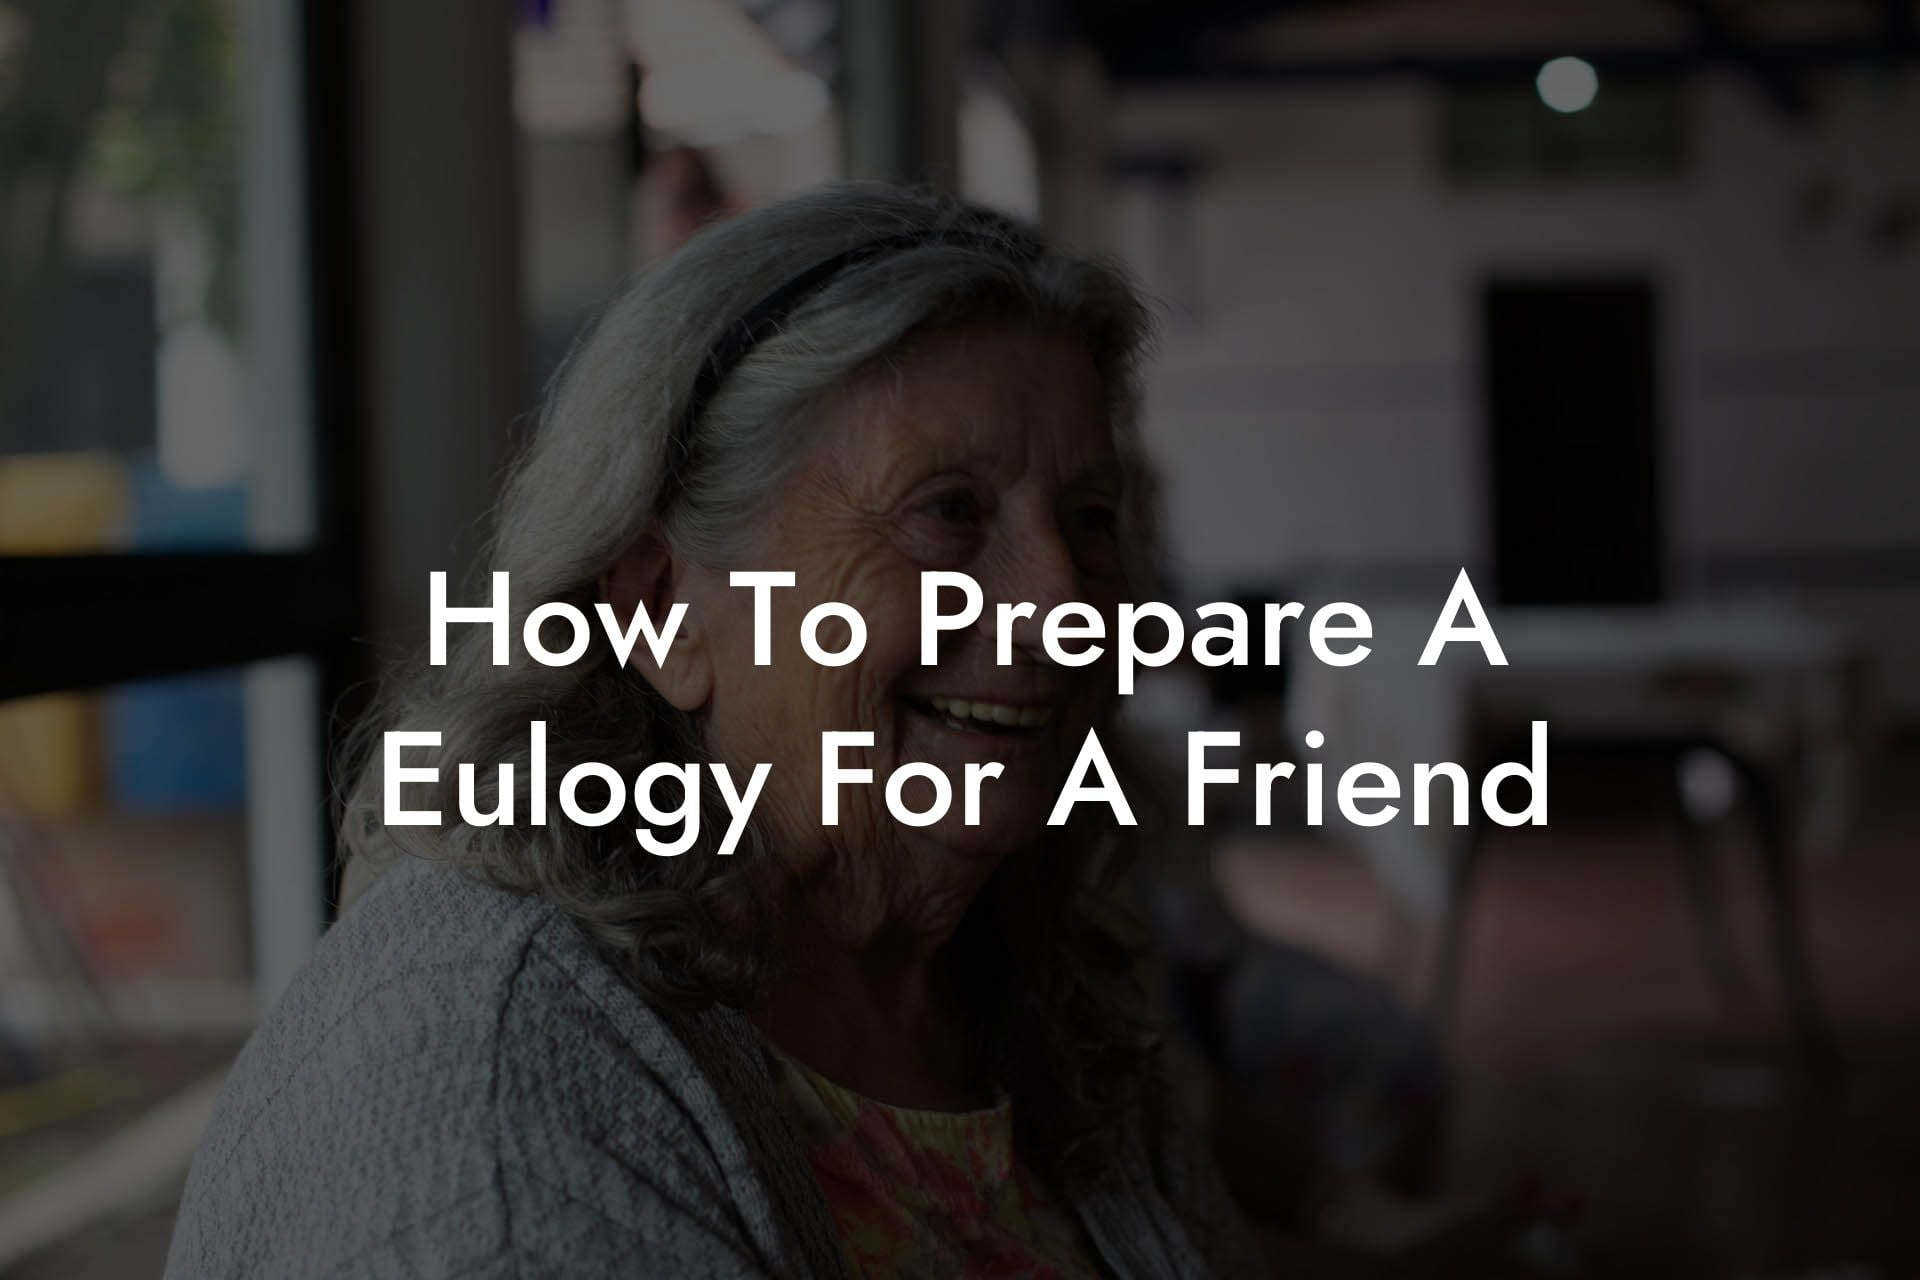 How To Prepare A Eulogy For A Friend